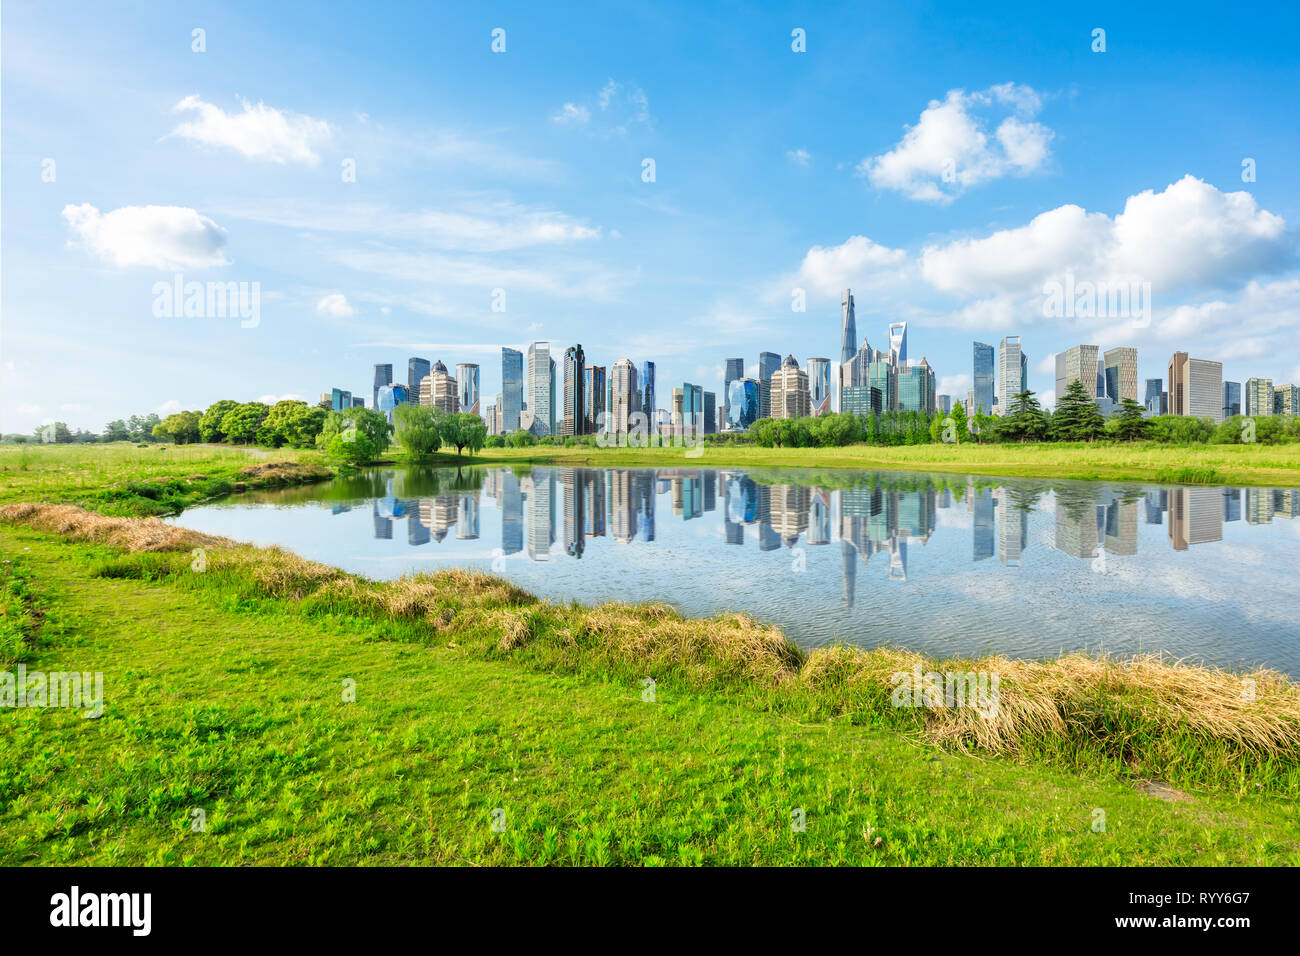 Shanghai city skyline and green grass with lake under the blue sky,China Stock Photo